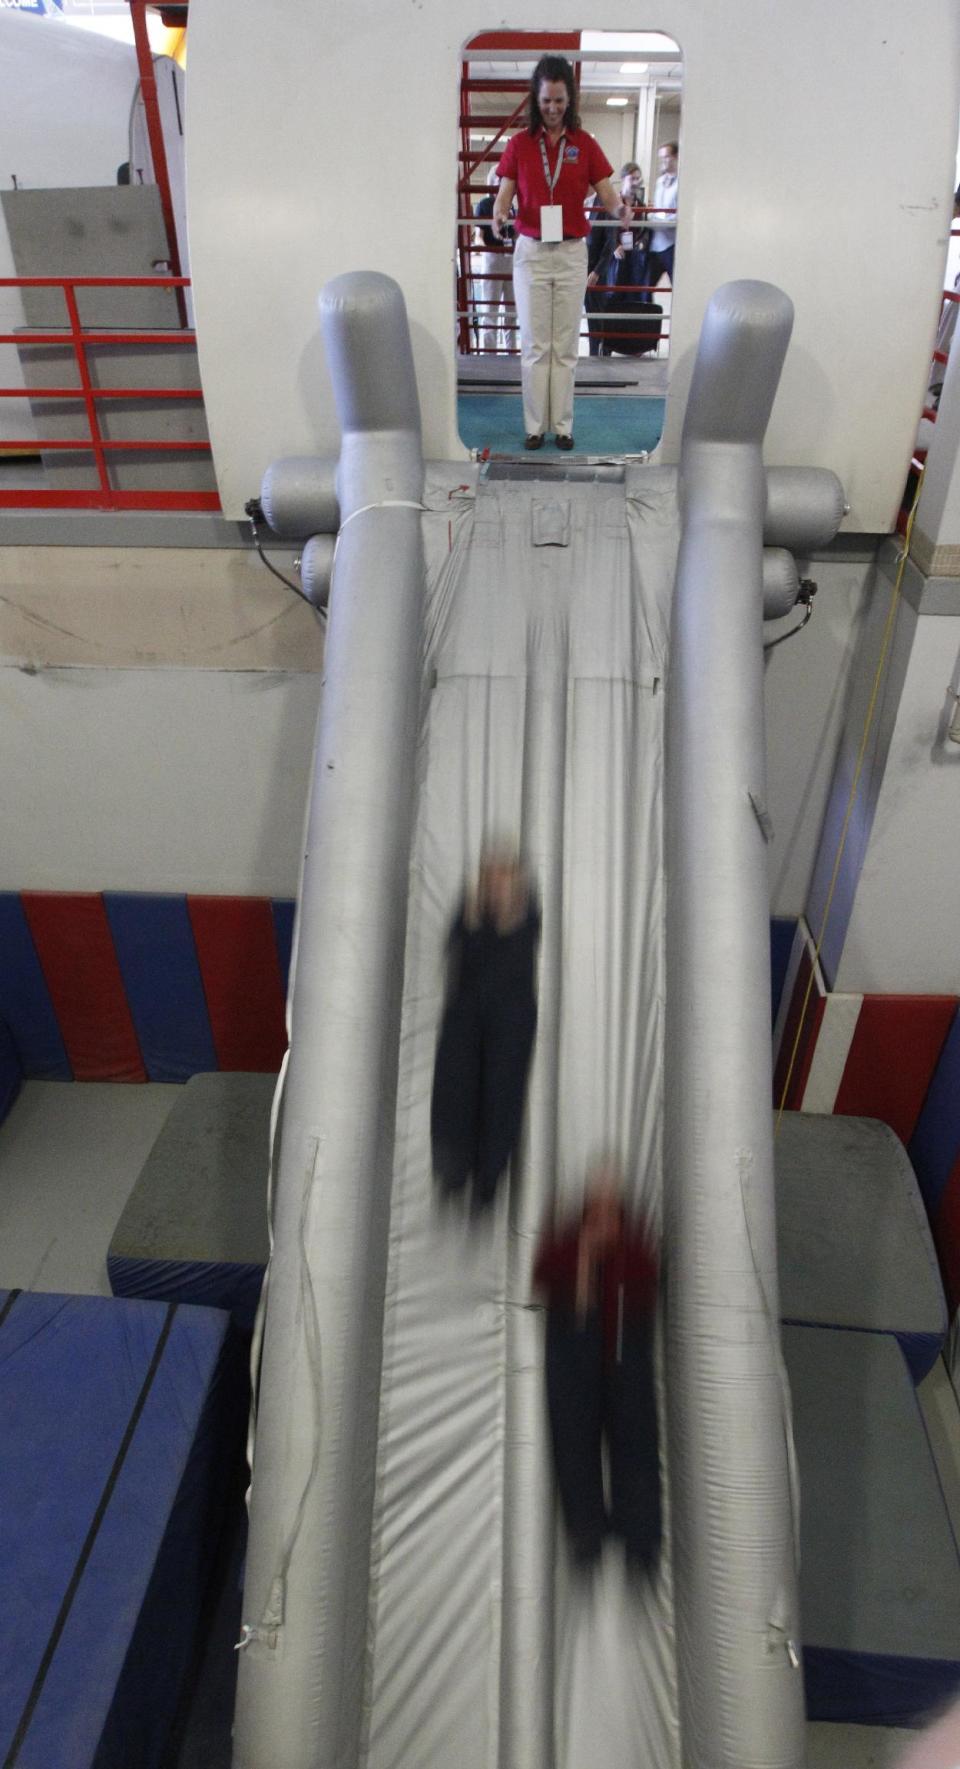 In this photo made Thursday, Jan. 26, 2012, members of the Megado frequent fliers group jump off an emergency exit slide during an exercise at the American Airlines training facility in Fort Worth, Texas. It’s the ultimate field trip for aviation geeks, 160 of frequent fliers chartered an American Airlines jet and hoped across the country visiting aviation industry spots. (AP Photo/LM Otero)